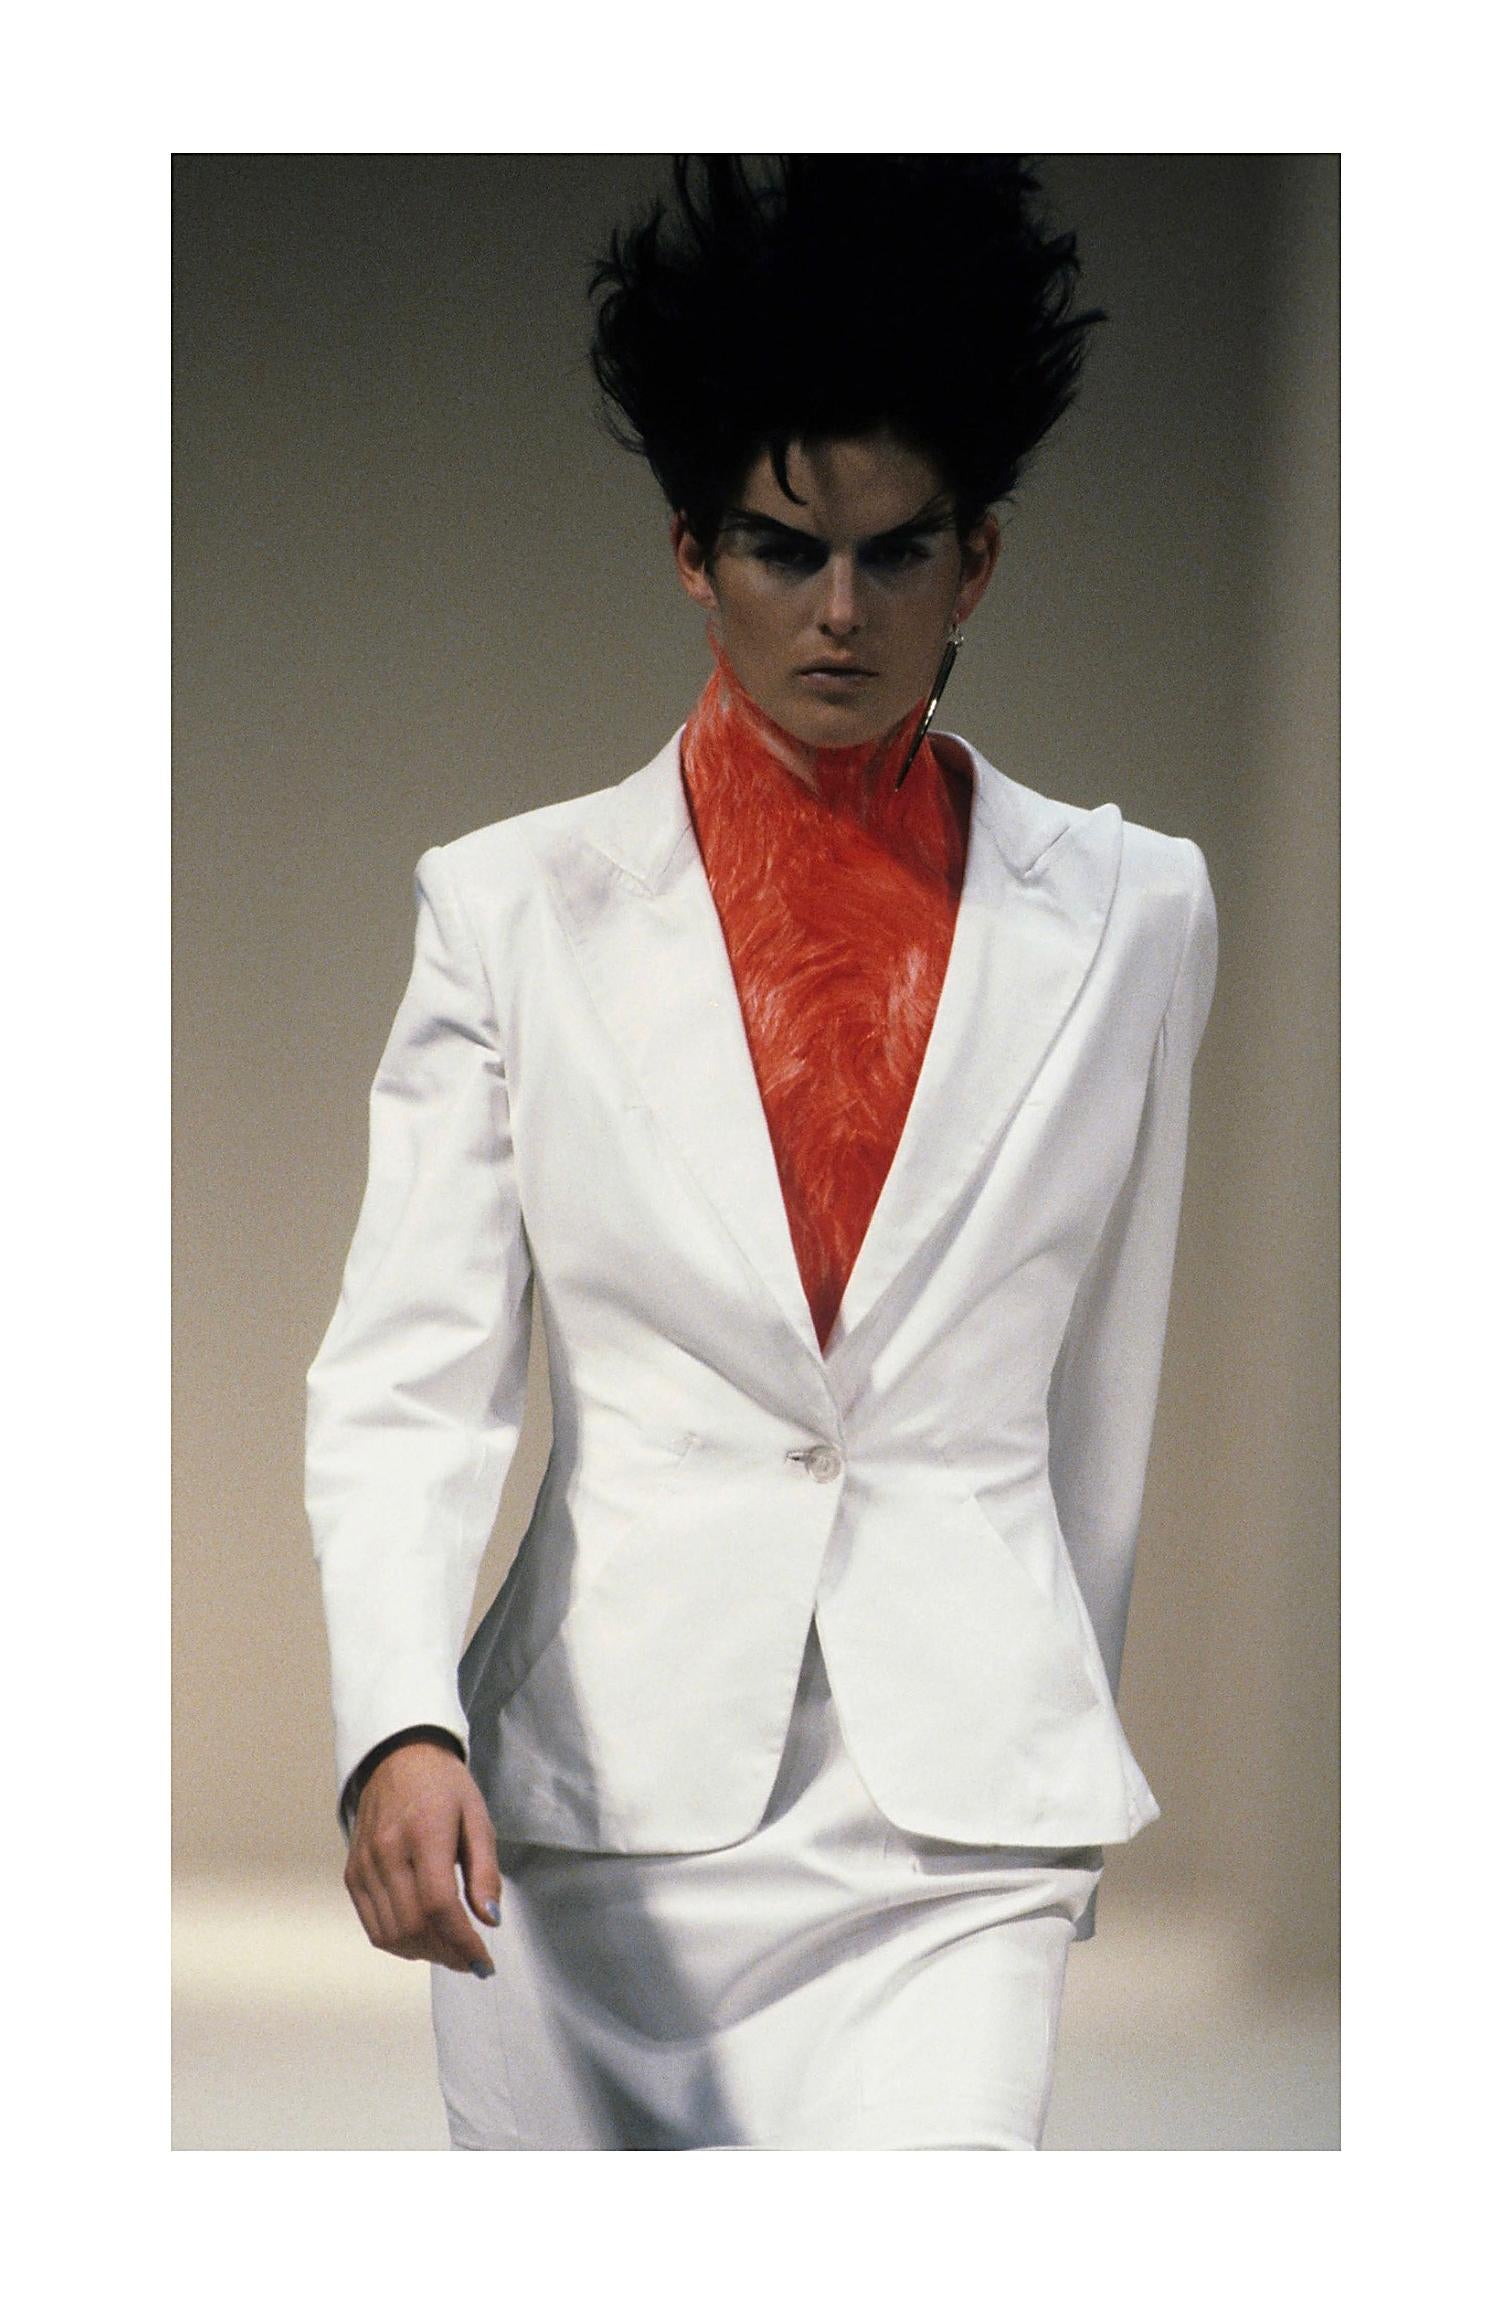 ALEXANDER McQUEEN S/S 1996 “The Hunger” Gray Tailored Long Sleeve Blazer Jacket For Sale 2